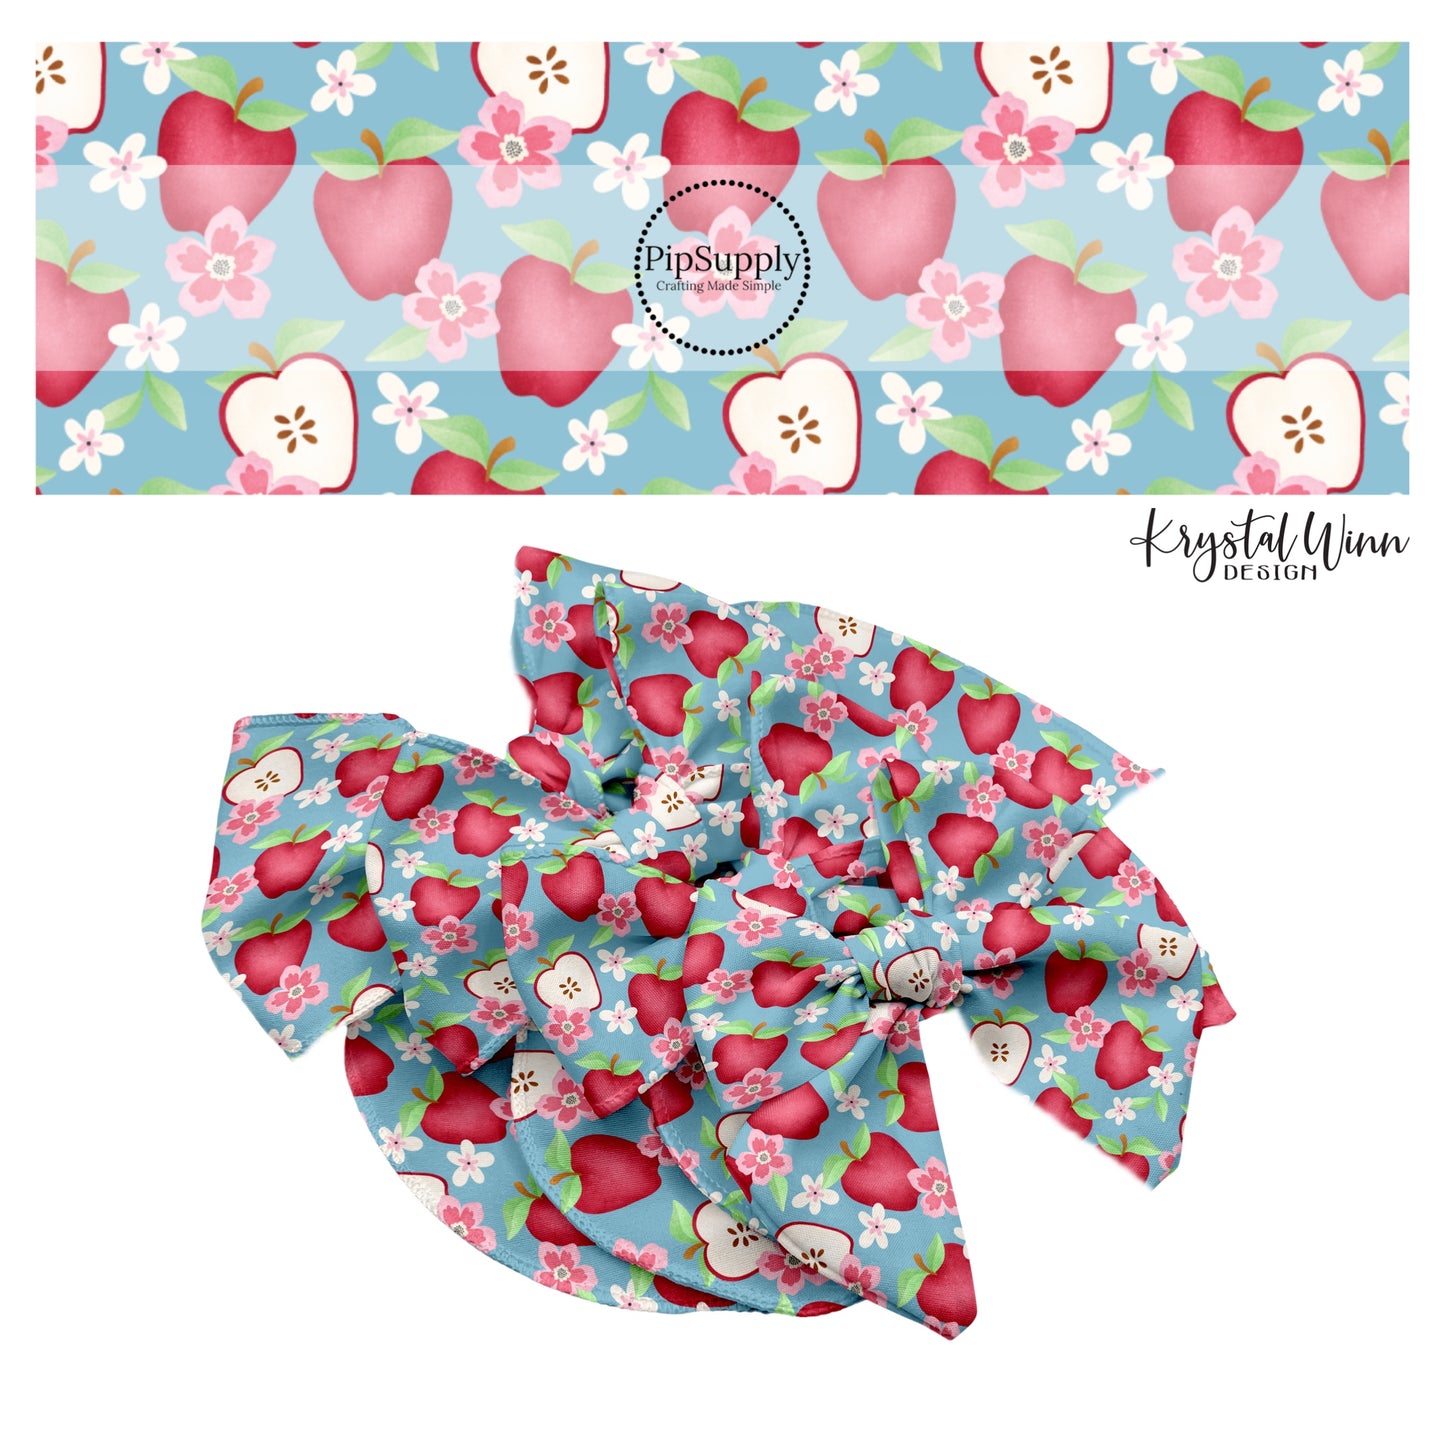 These fall apple themed blue no sew bow strips can be easily tied and attached to a clip for a finished hair bow. These fun fall bow strips are great for personal use or to sell. The bow strips features red apples and apple slices with small flowers on blue.